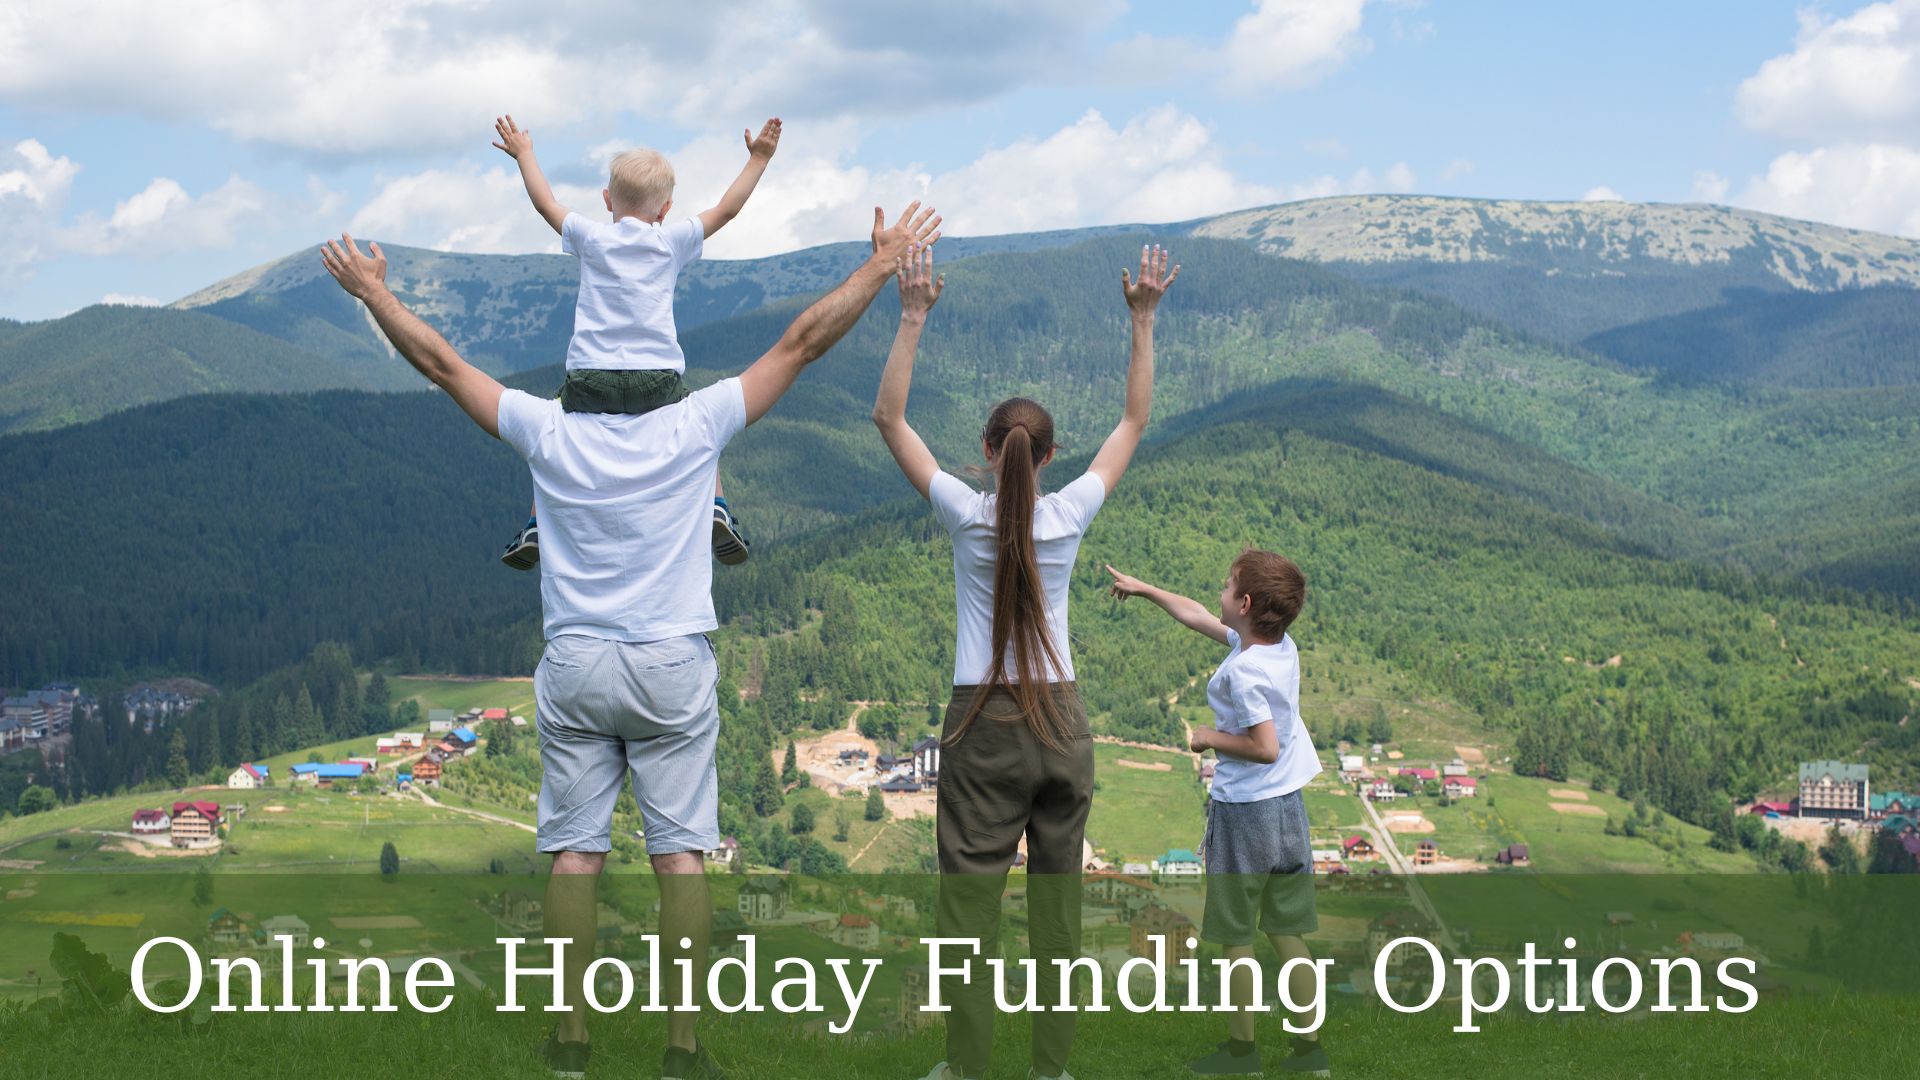 Online Holiday Funding Options